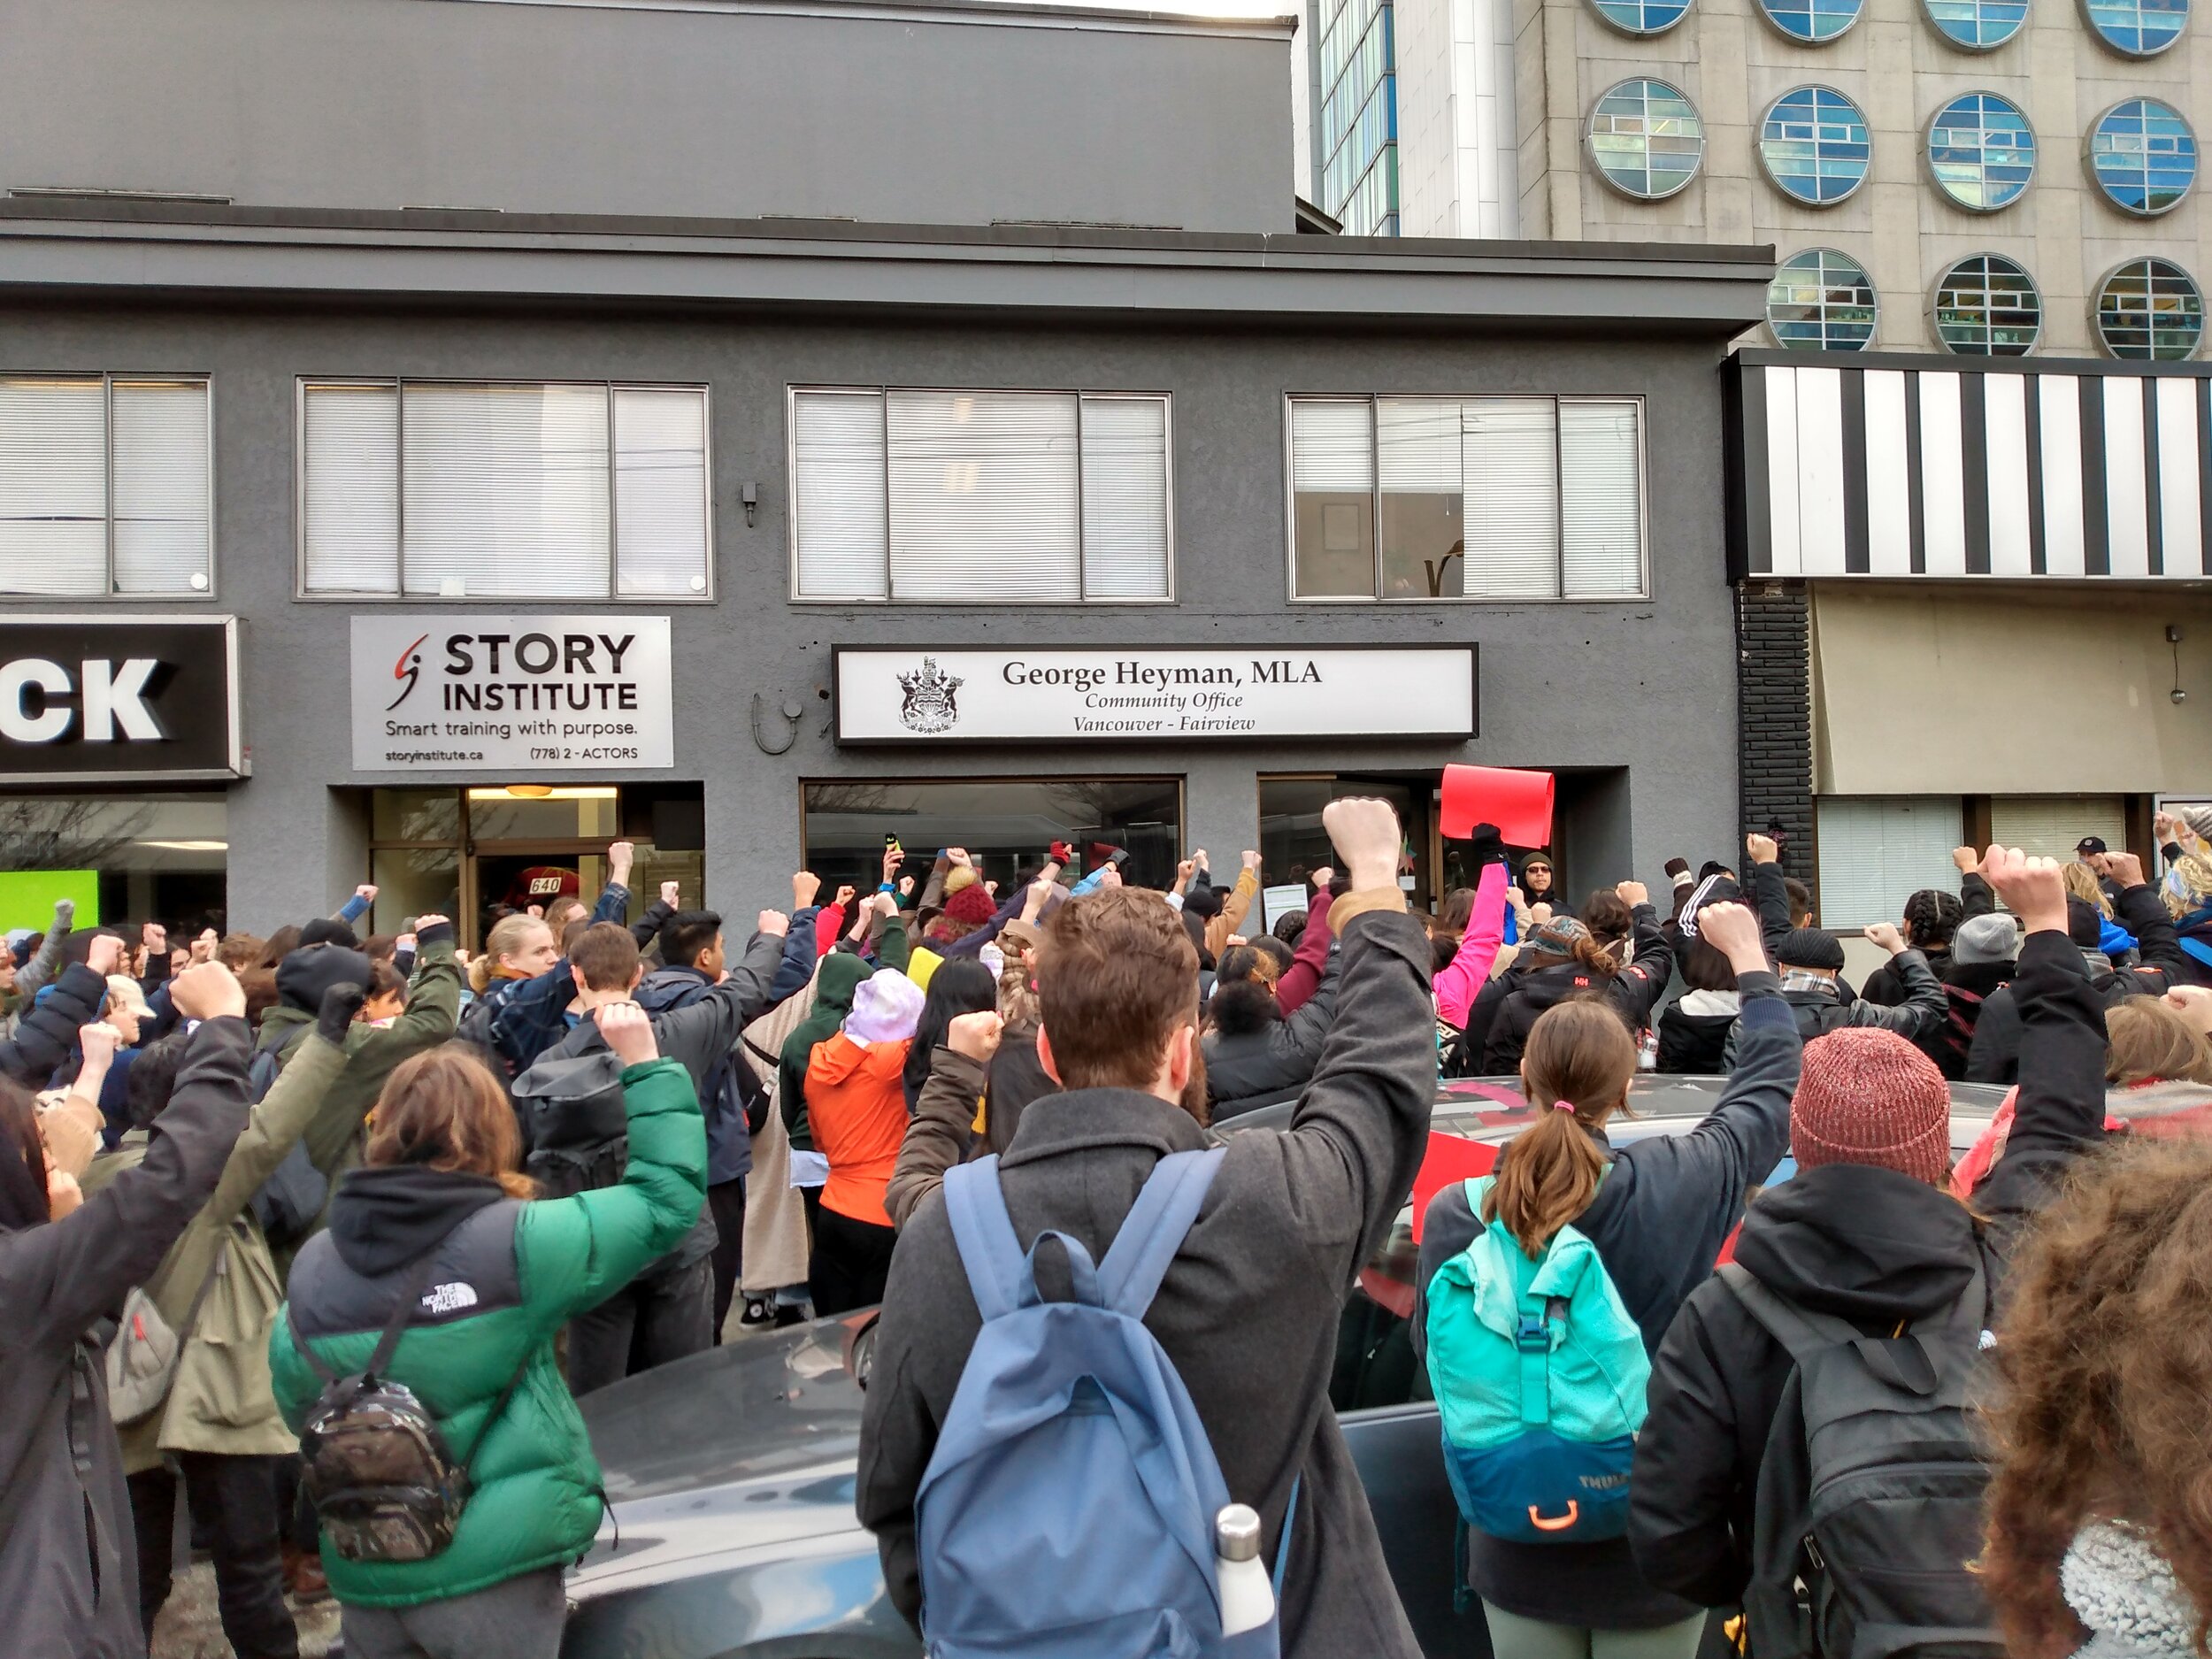 Student walkout, rally, and march in solidarity with Wet'suwet'en - Vancouver, Jan 2020 (8).jpg